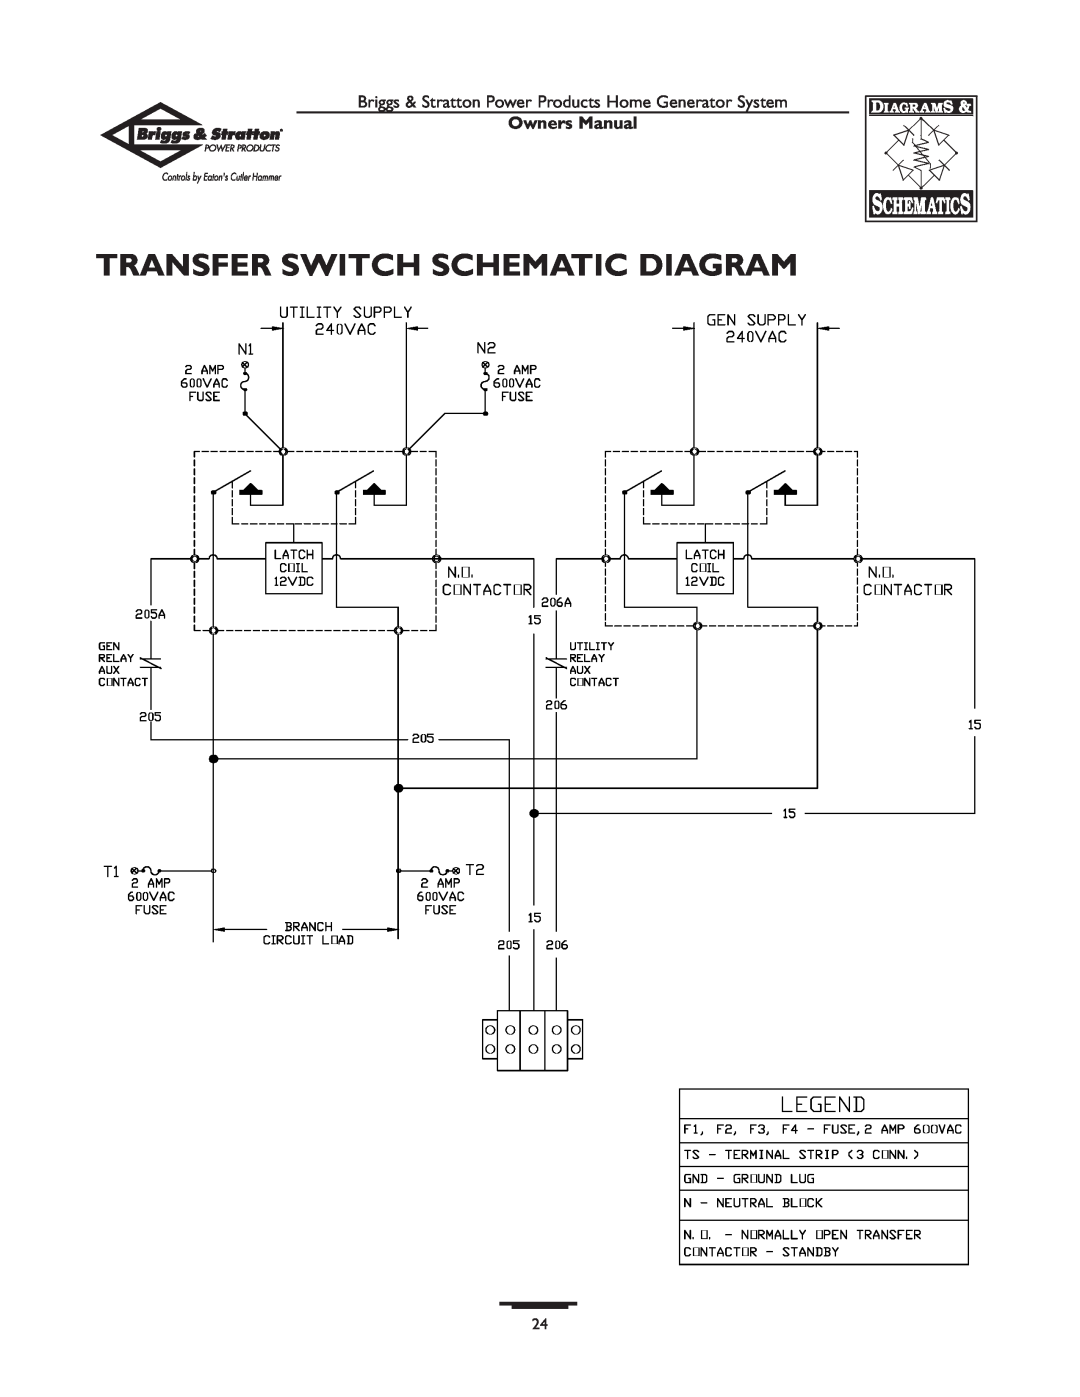 Briggs & Stratton 190839GS owner manual Transfer Switch Schematic Diagram, Owners Manual 